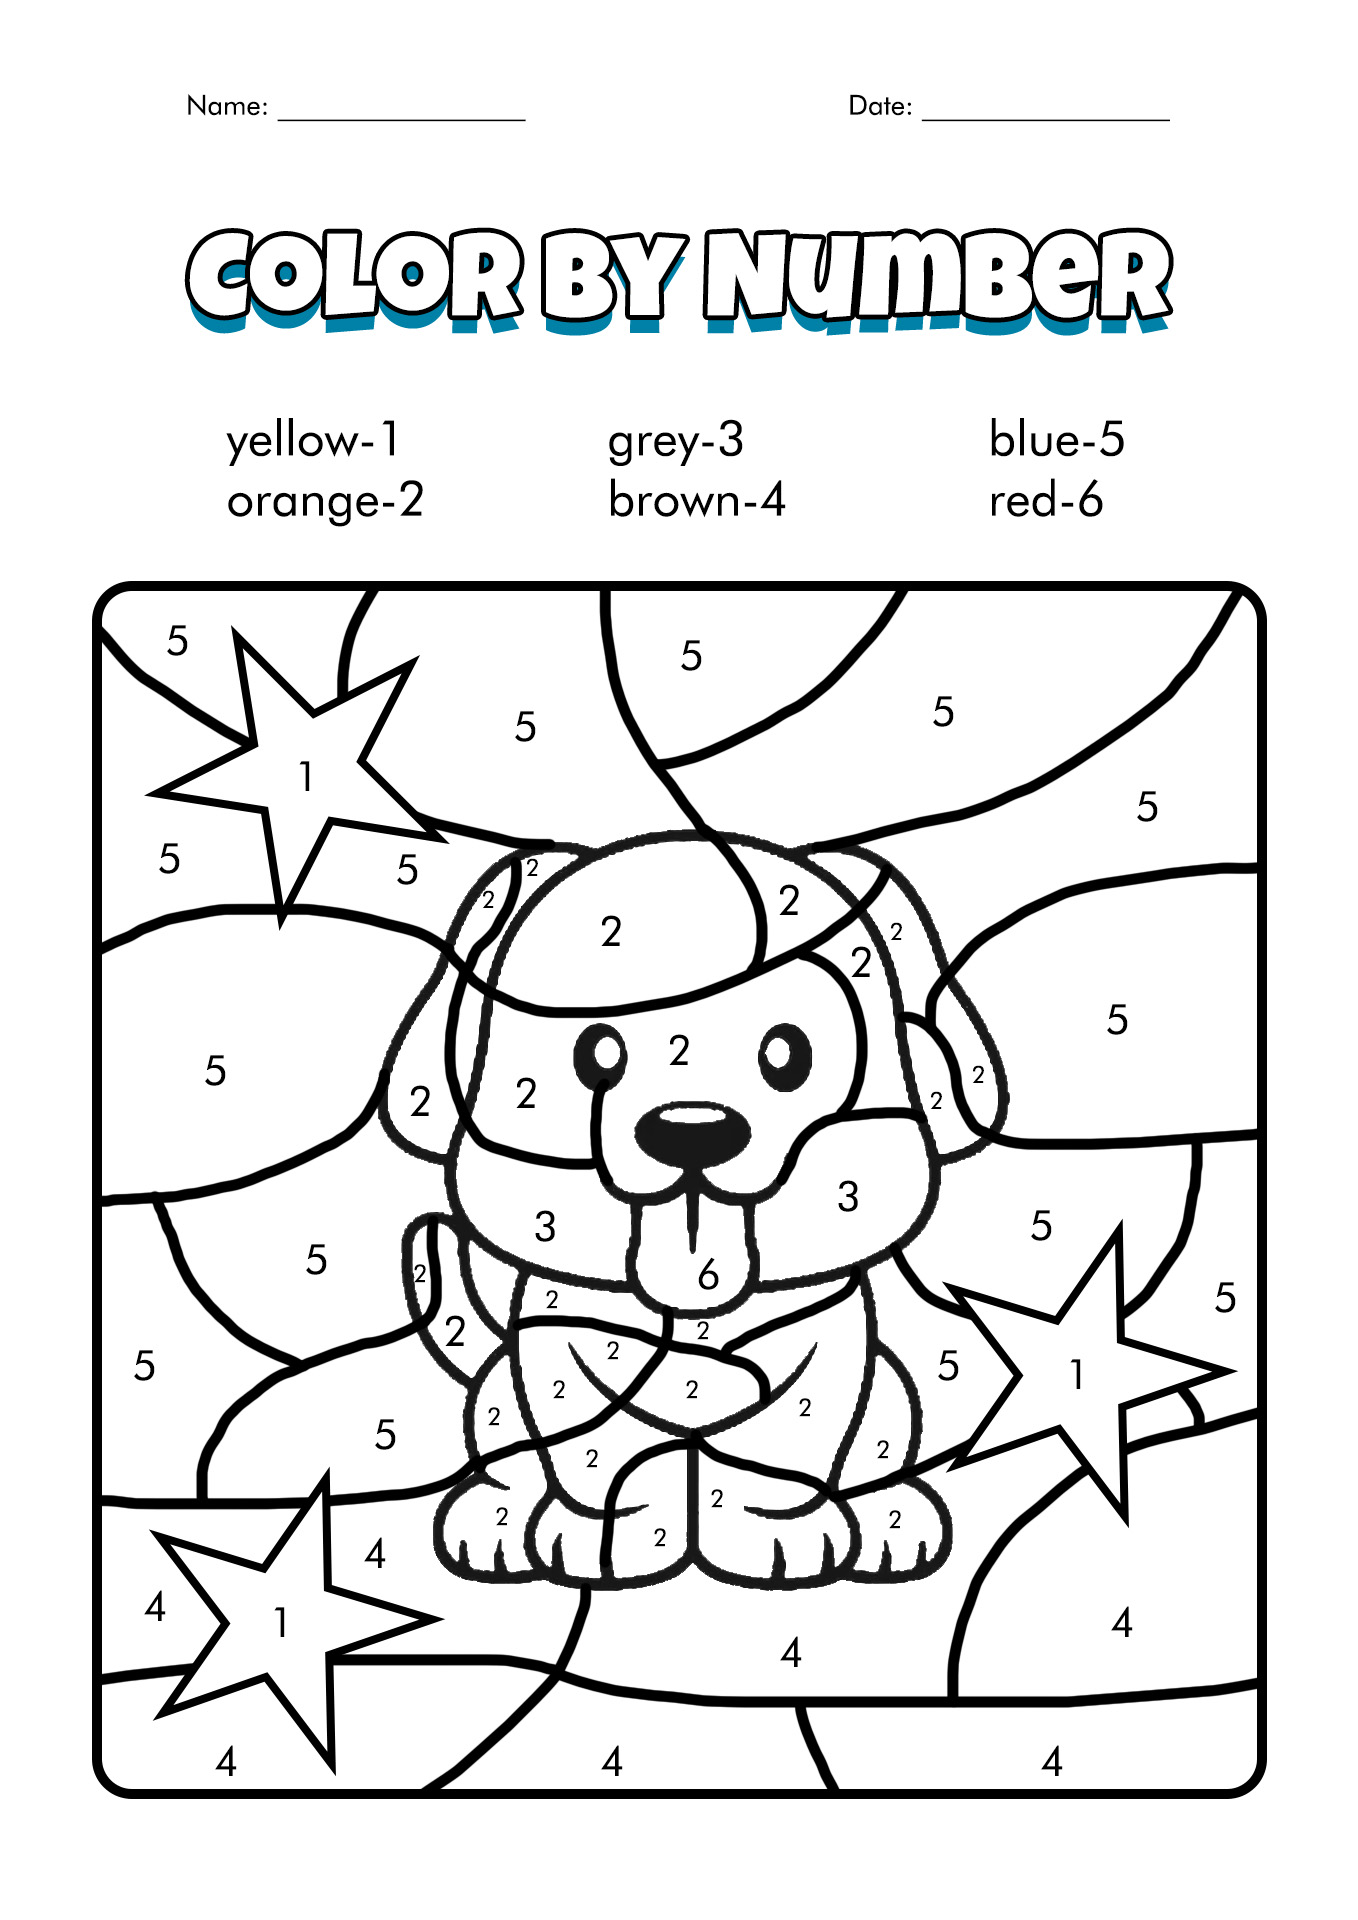 color-by-number-printables-advanced-color-number-numbers-coloring-adult